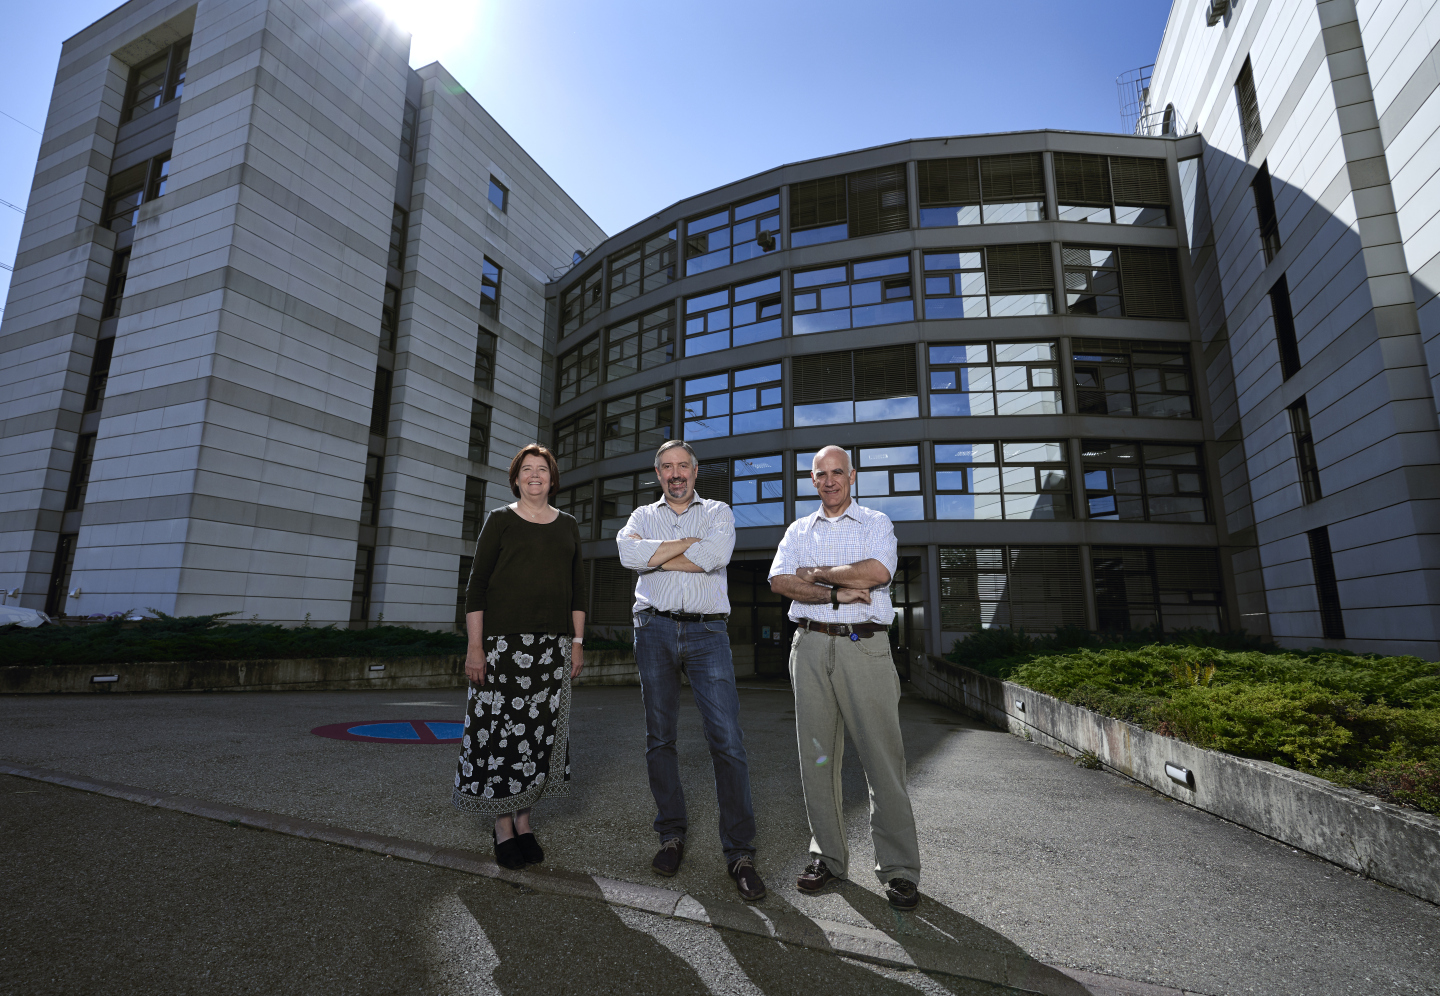 Three persons posing in front of a building